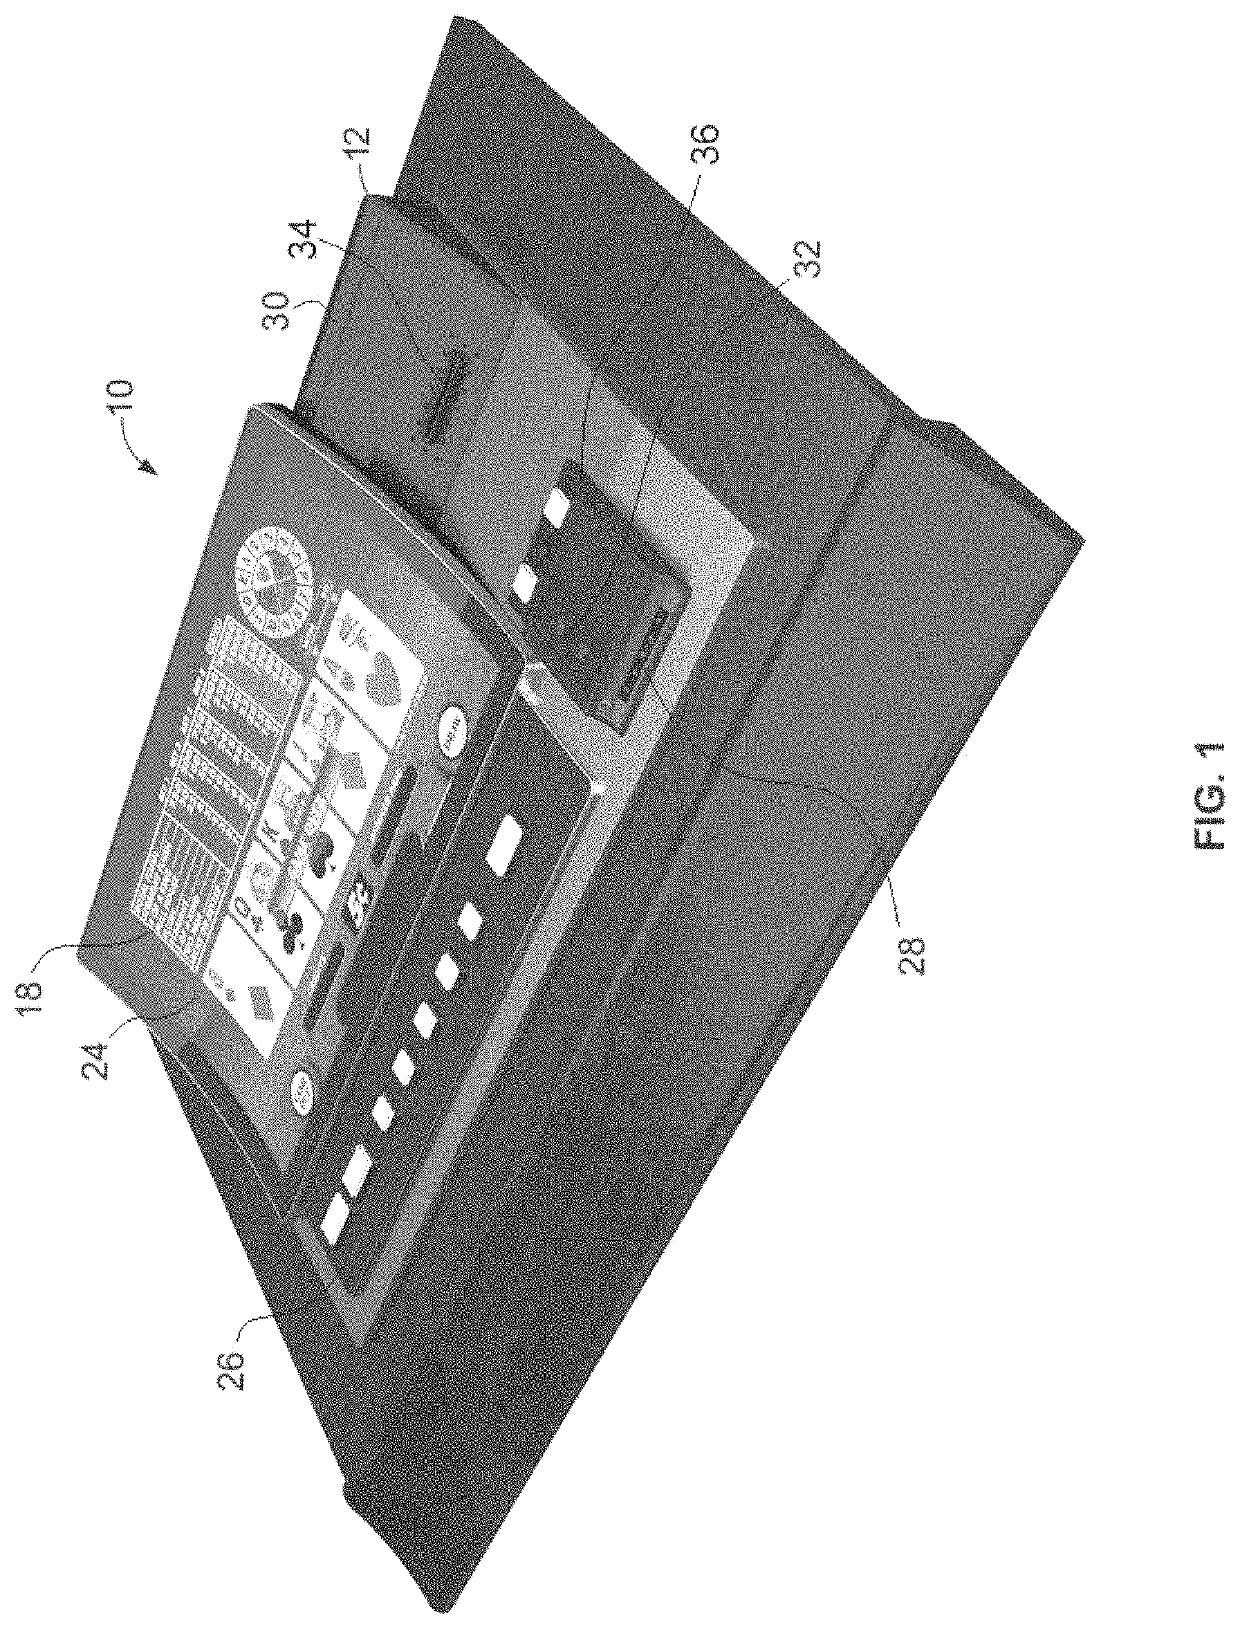 Combination bill entry/ticket dispensing structure for a gaming machine